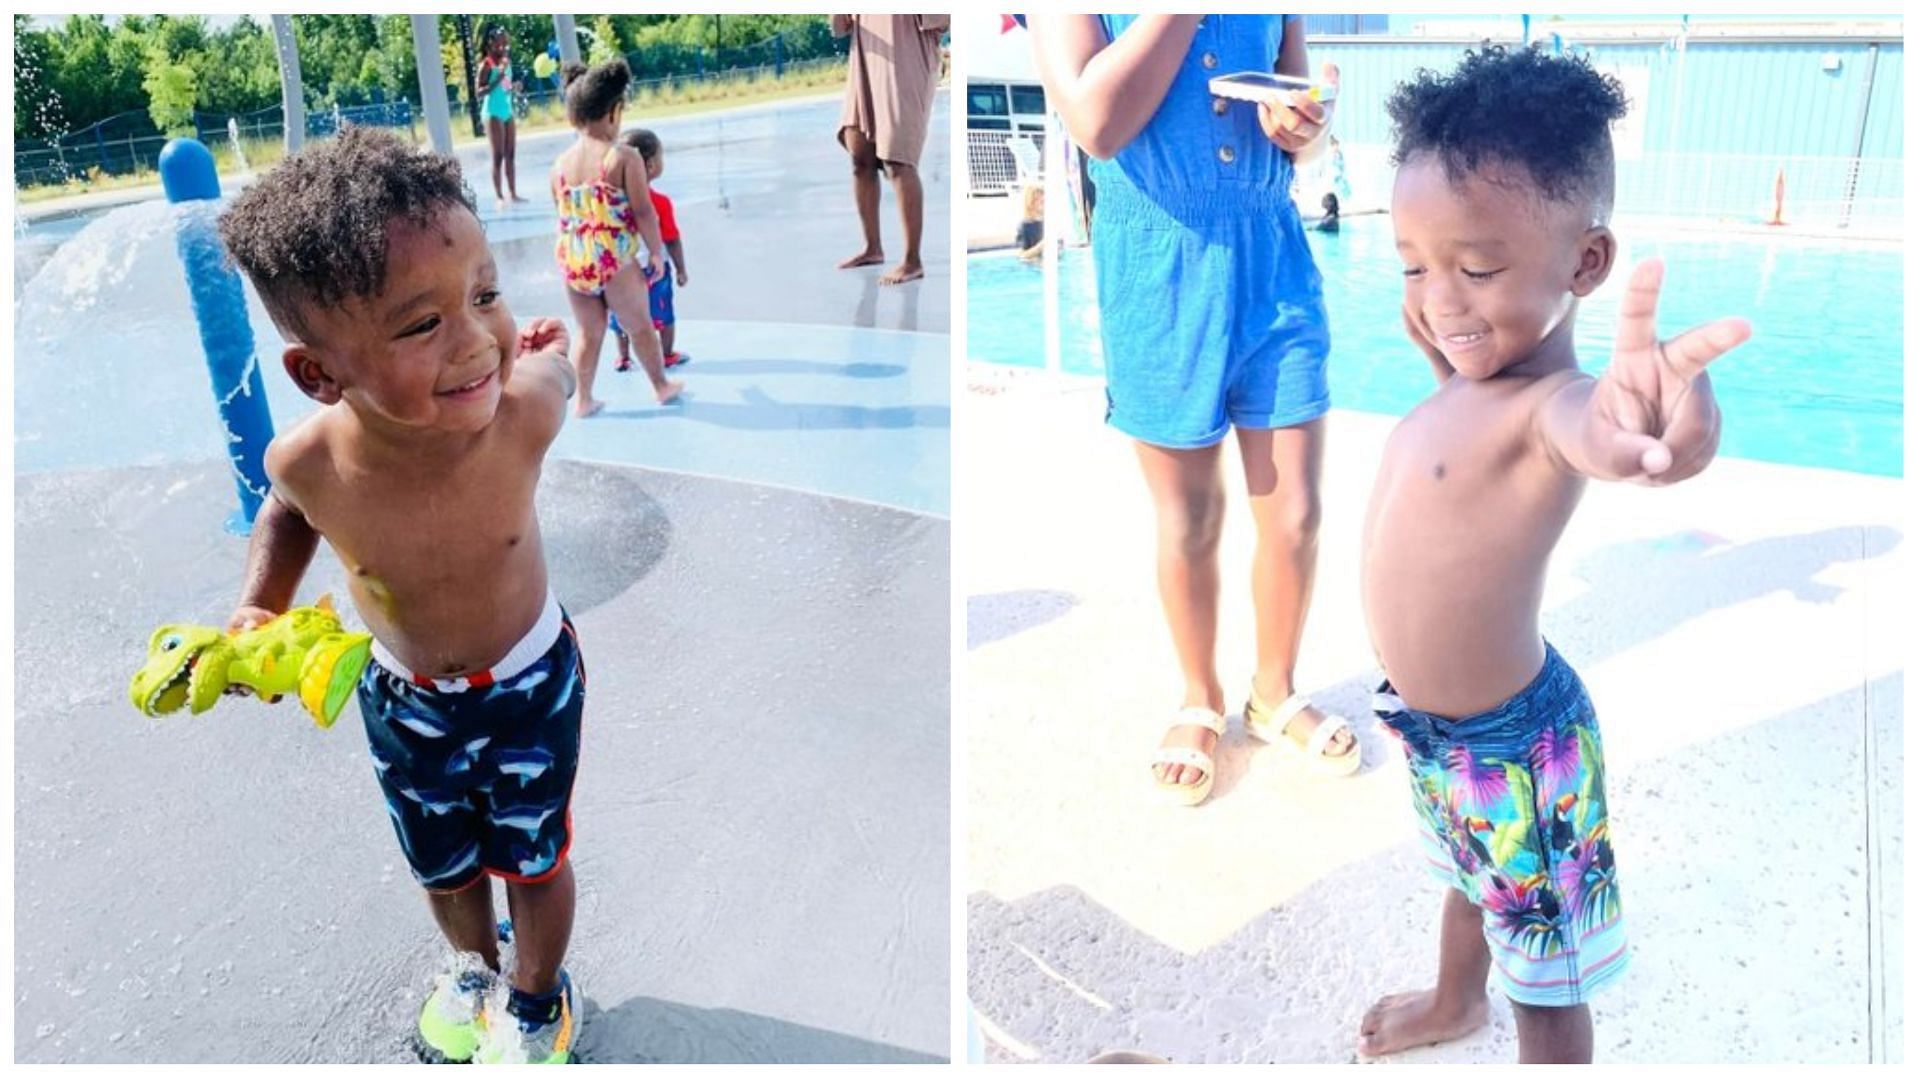 4-year-old Israel Scott died after drowning while taking swimming lessons, (Images via Olivia Tate, Faith + Therapy/Twitter)